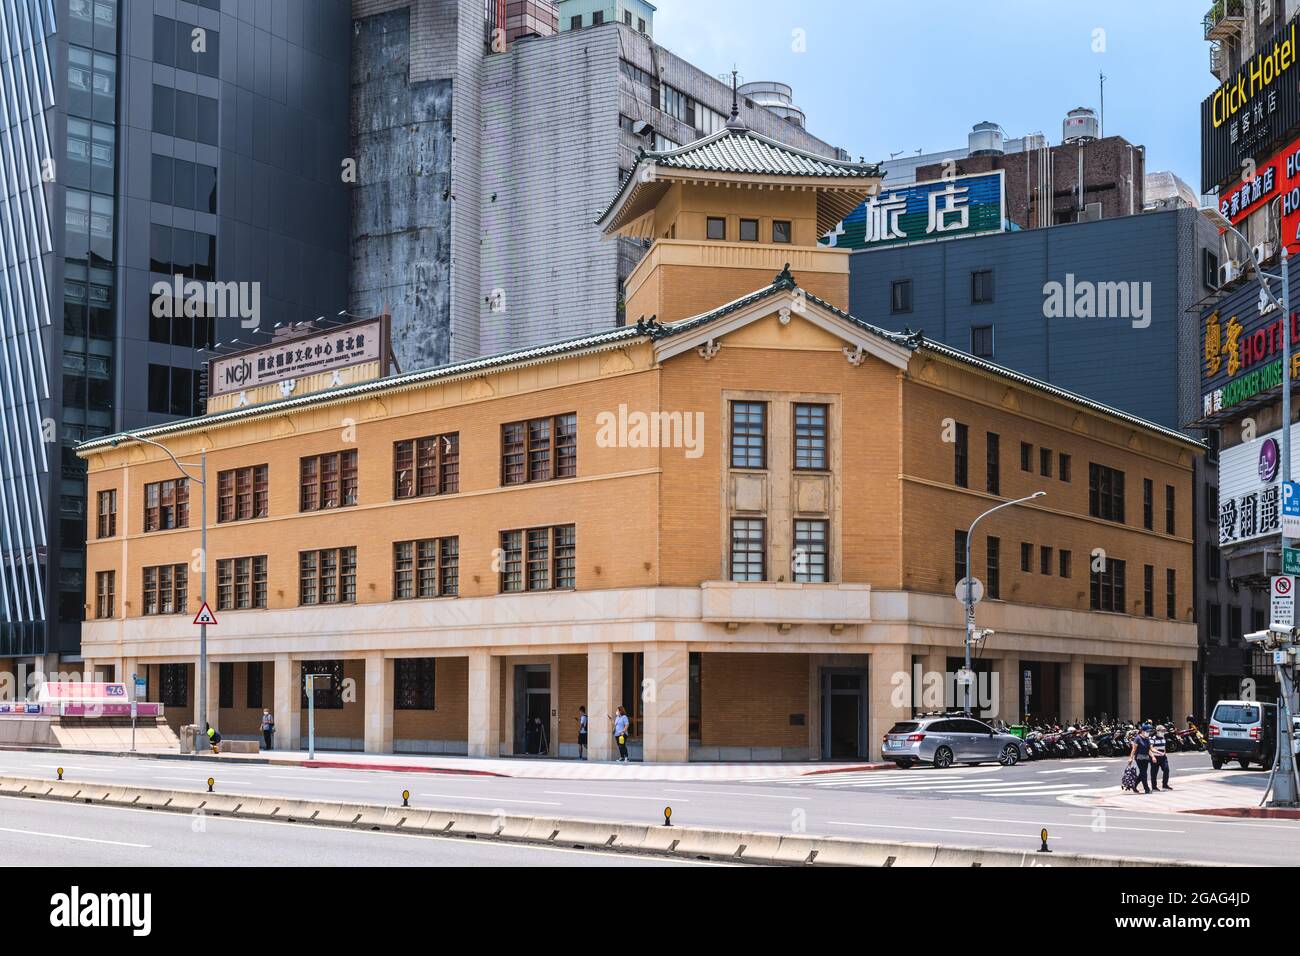 July 29, 2021: National Center of Photography and Images, NCPI, in taipei, taiwan, was originally used as Taipei branch of Japan shipping company Osak Stock Photo